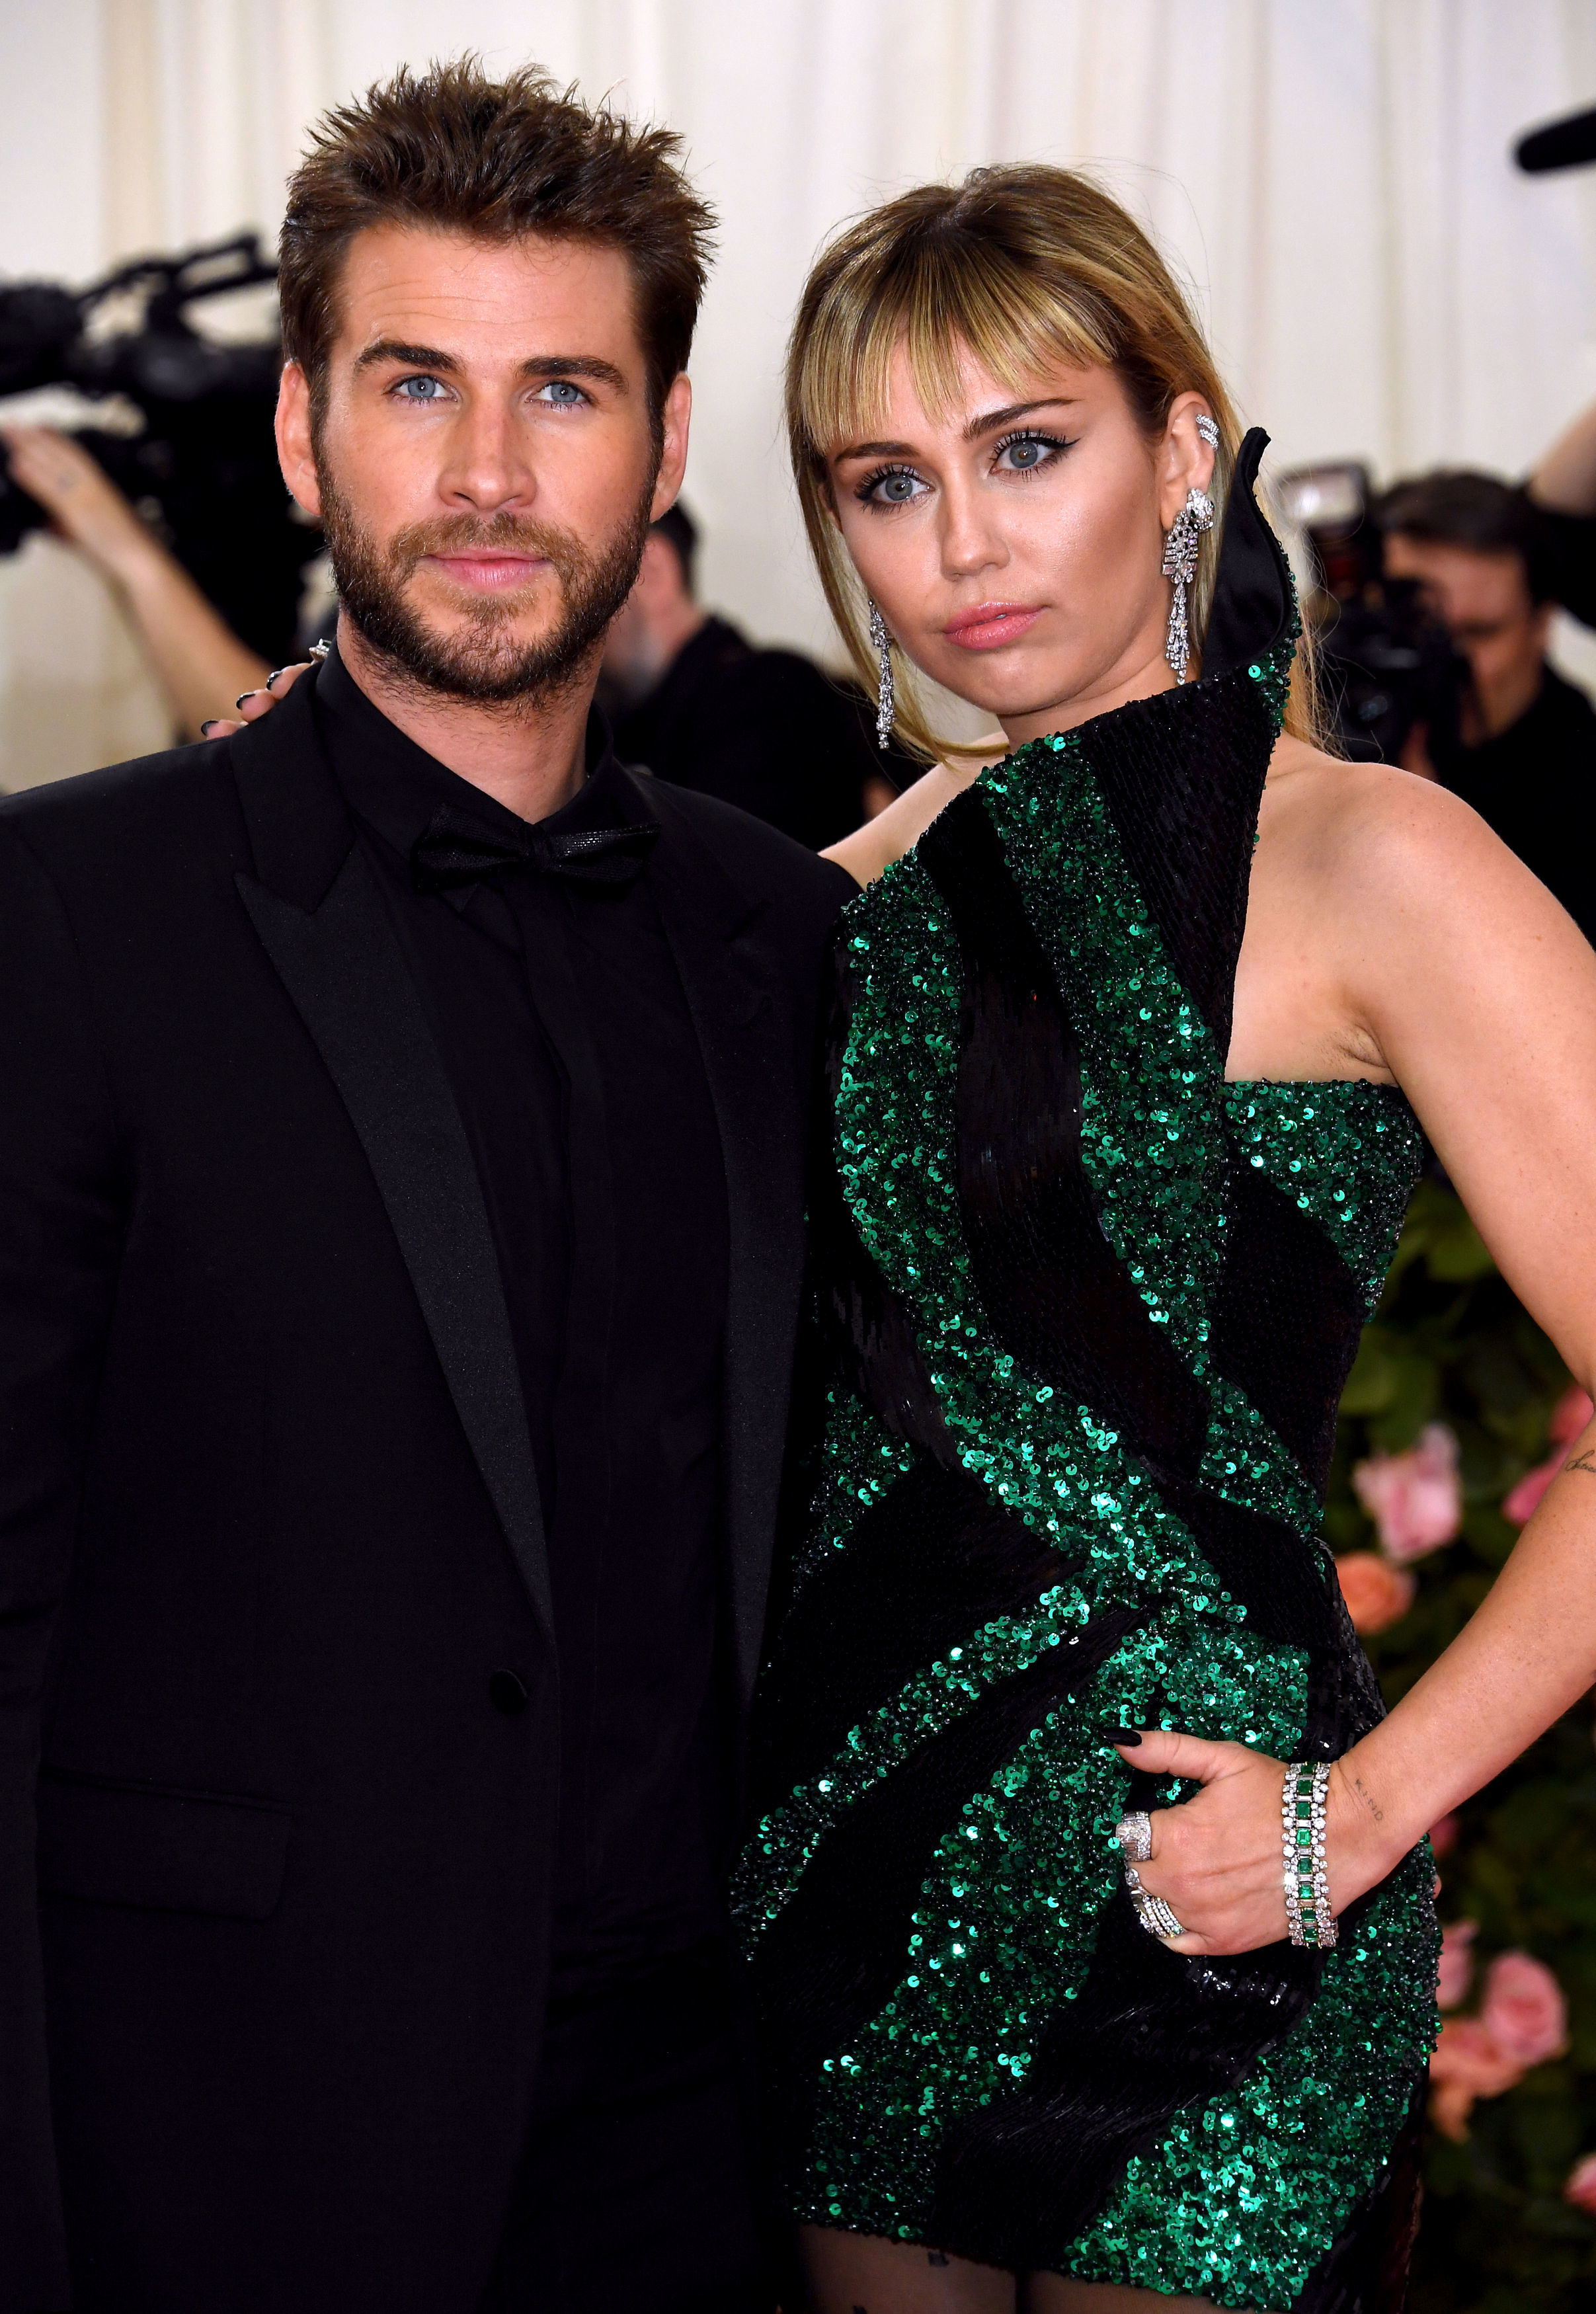 Liam and Miley posed together at an event in August 2019